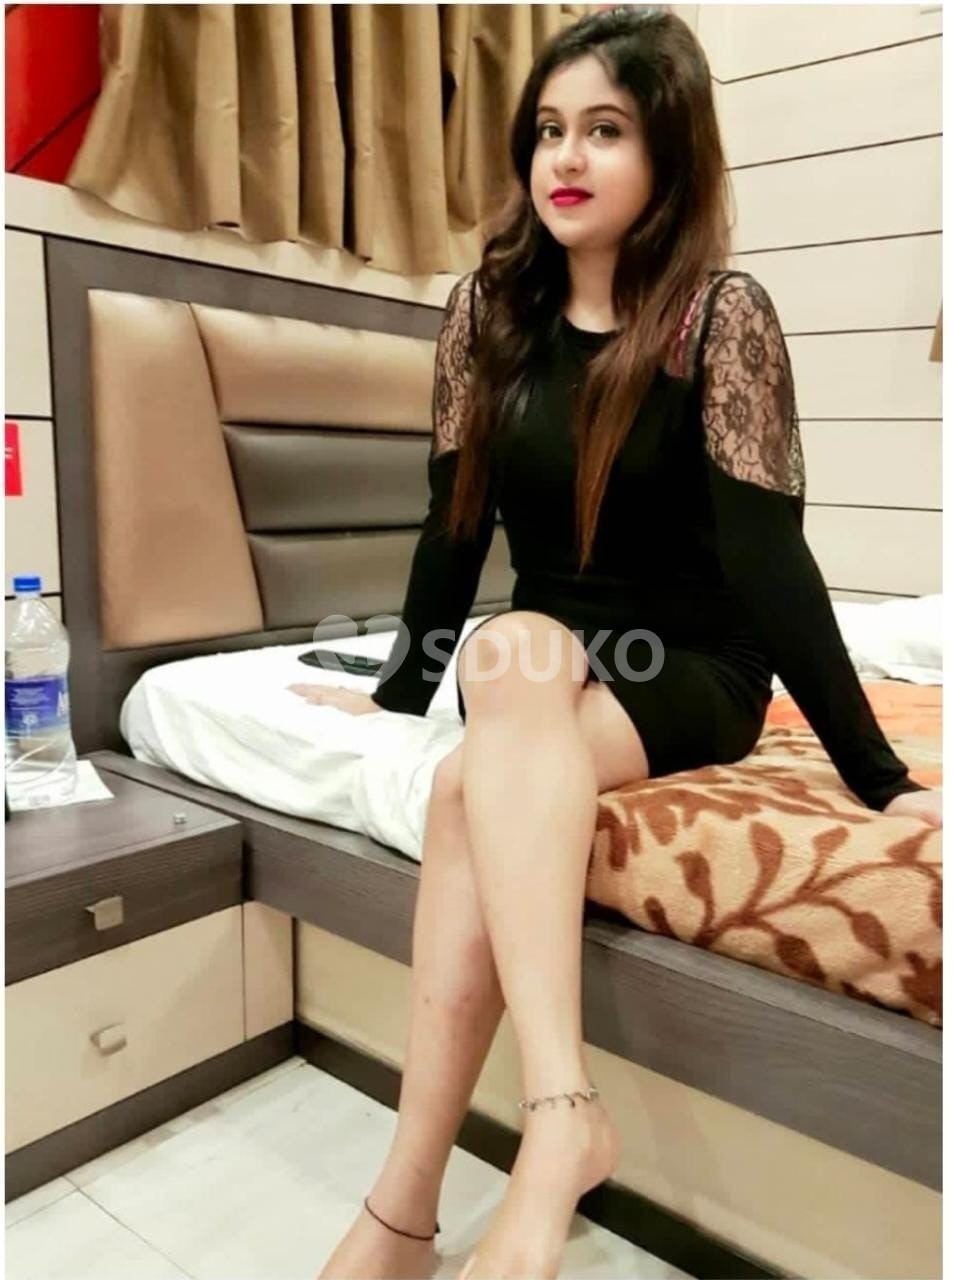 Nungambakkam vip call girl 24x7 service available .. .100% SAFE AND SECURE TODAY LOW PRICE UNLIMITED ENJOY HOT COLLEGE G